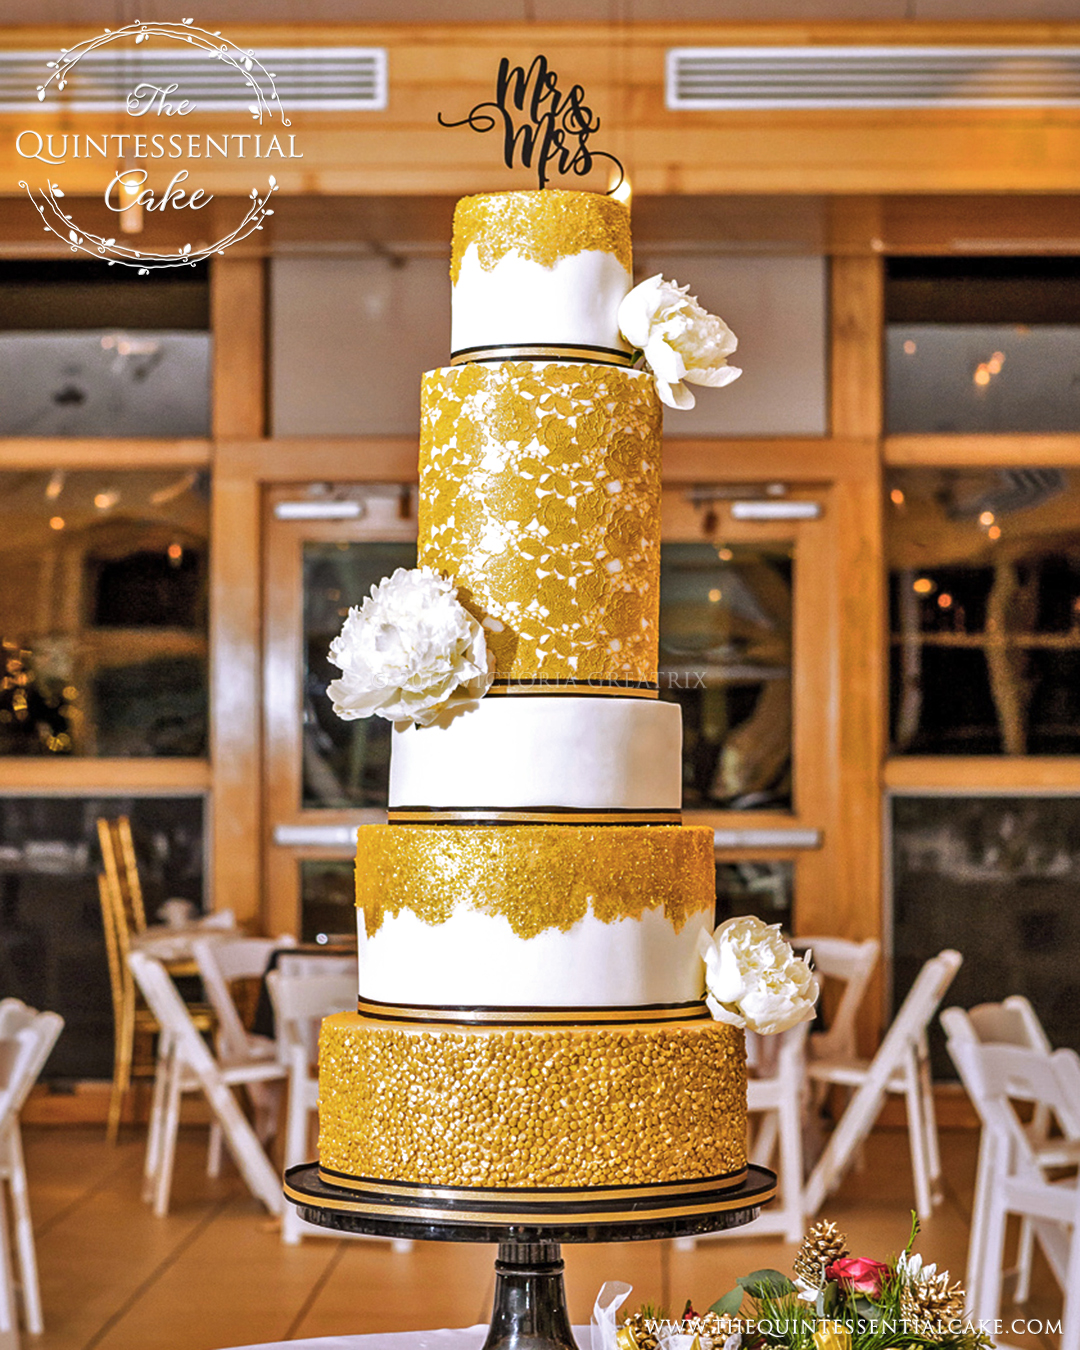 Wedding Cake featuring Gold Sugar Lace, Sequins and Glitter | The Quintessential Cake | Chicago | Luxury Wedding Cakes | Danada House